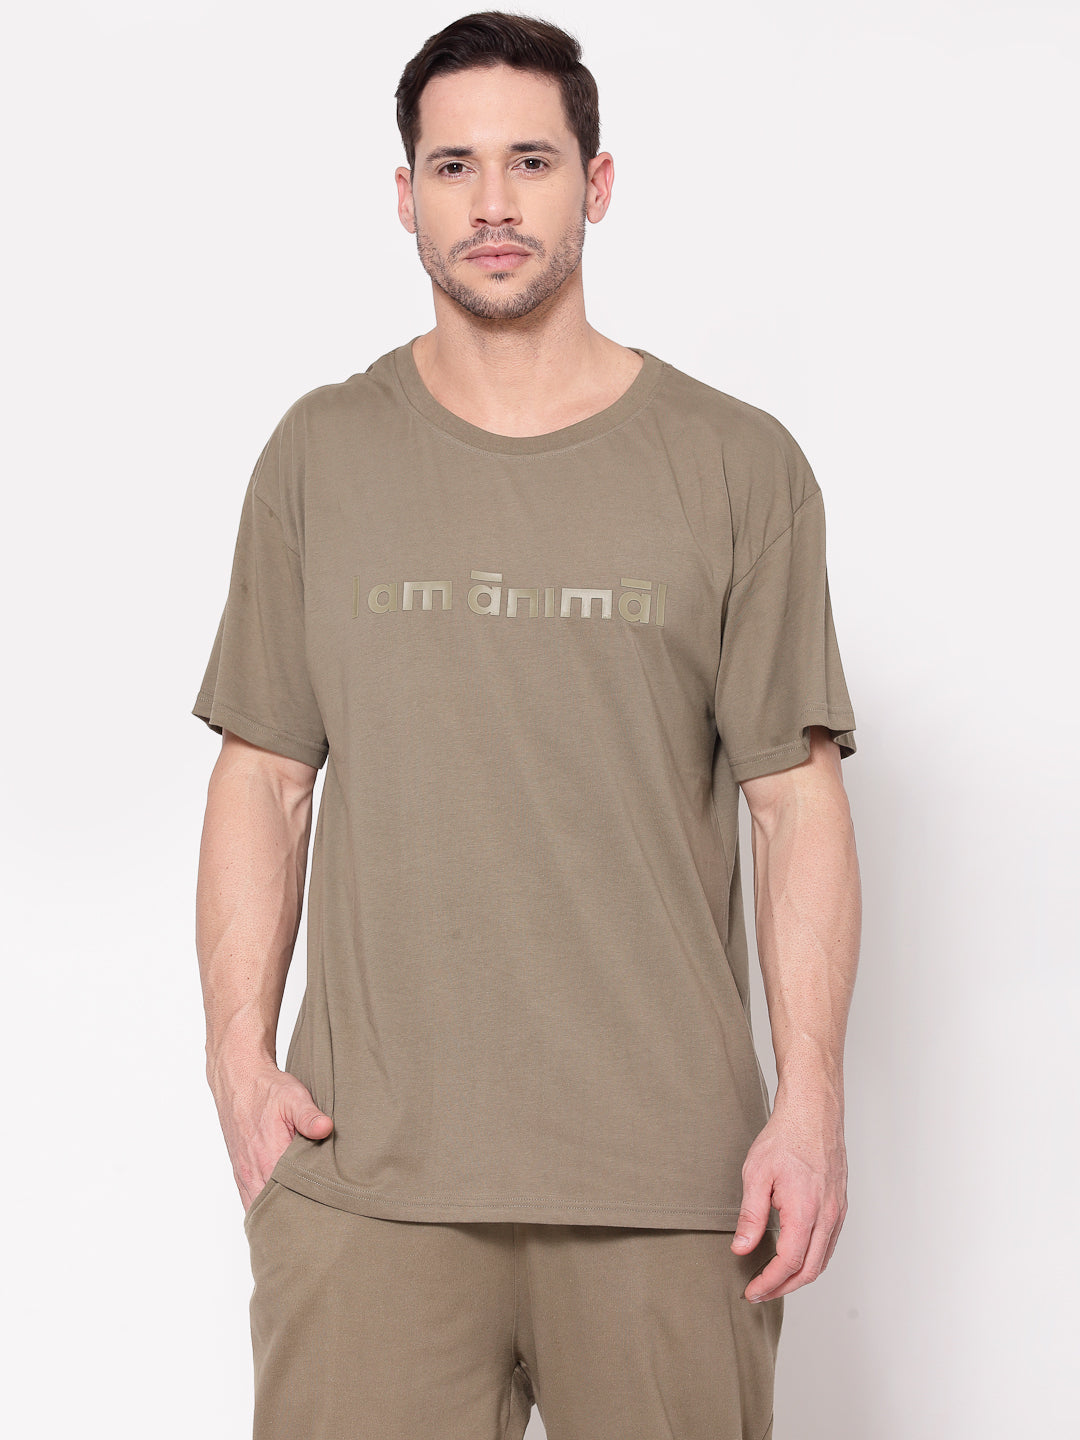 Old Army Green T-Basic Word Print